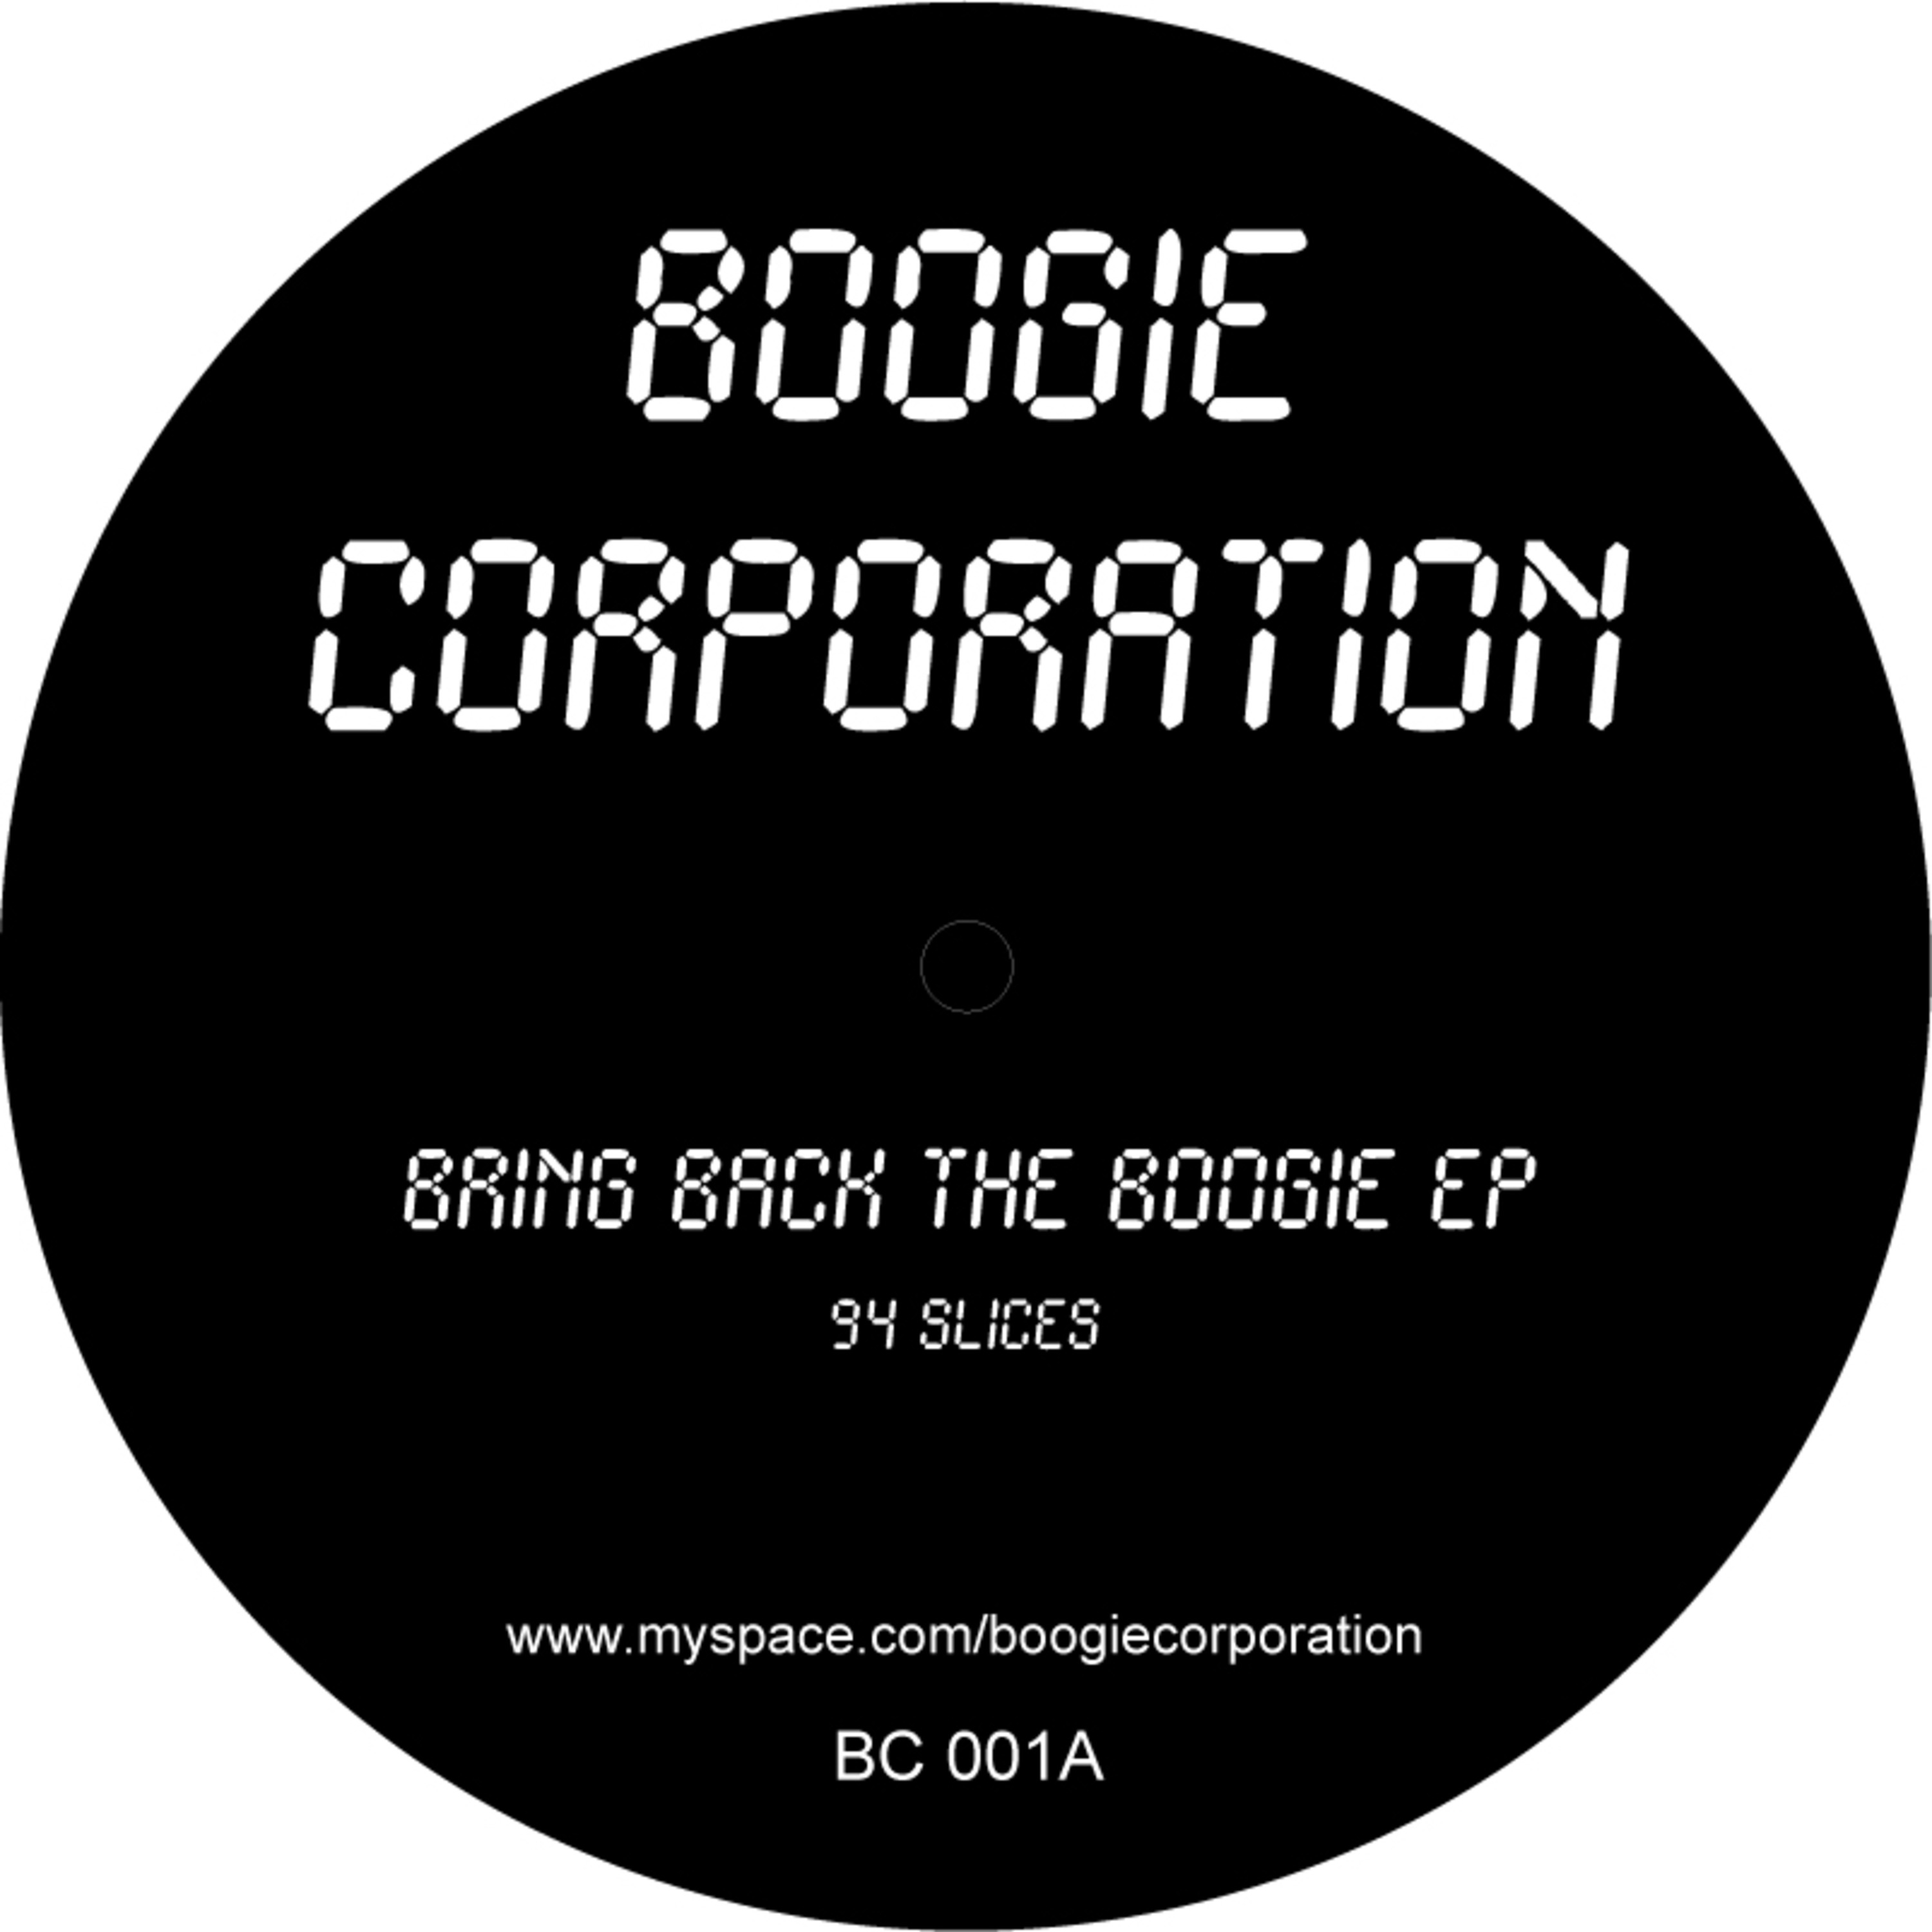 Bring Back the Boogie EP